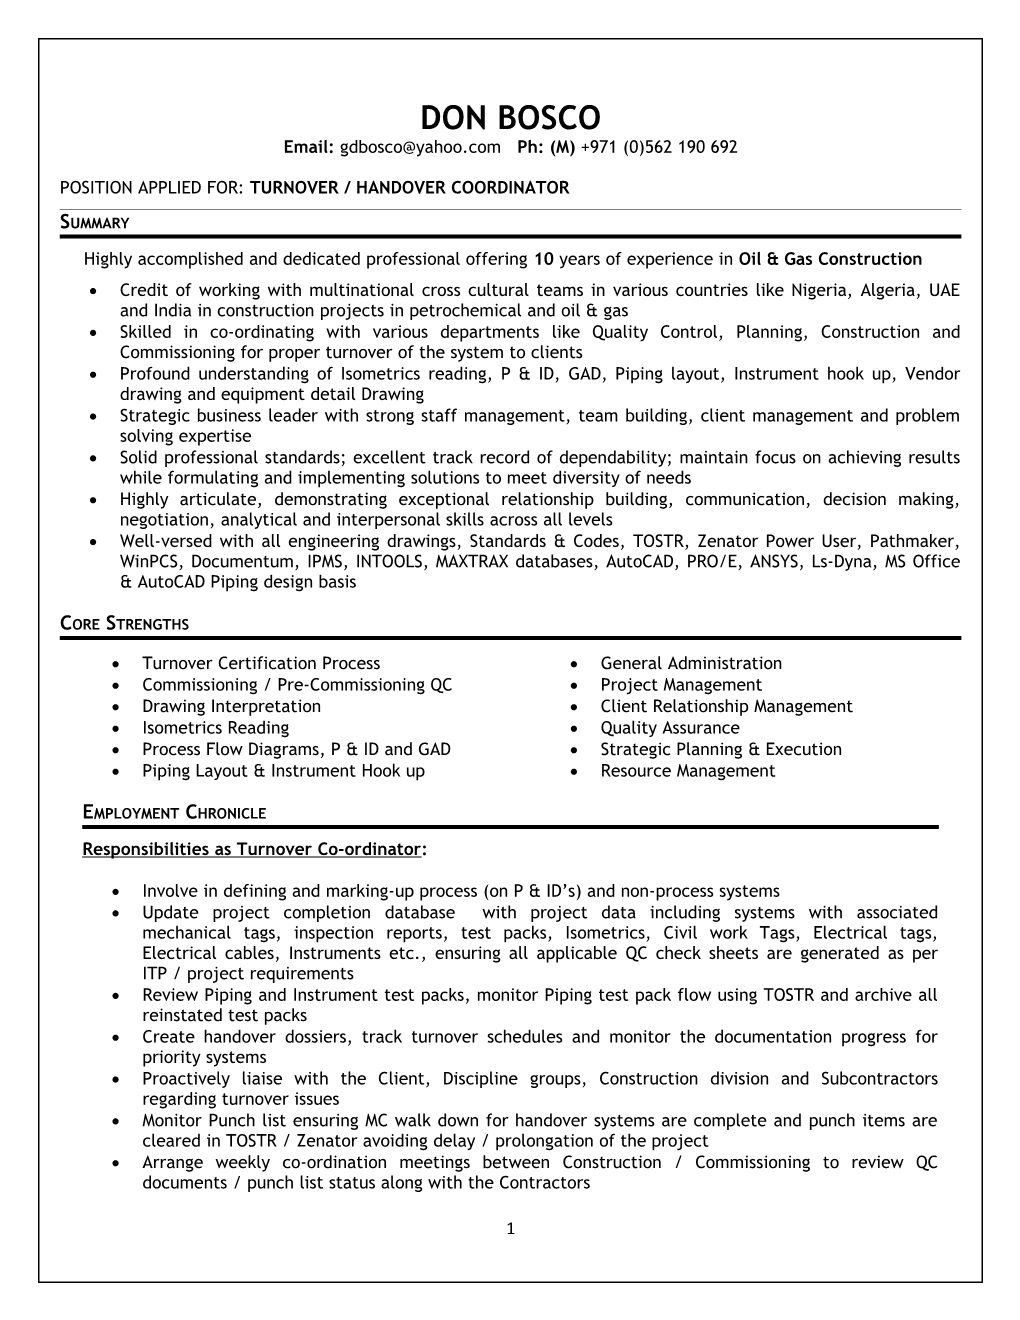 Position Applied For: Turnover / Handover Coordinator